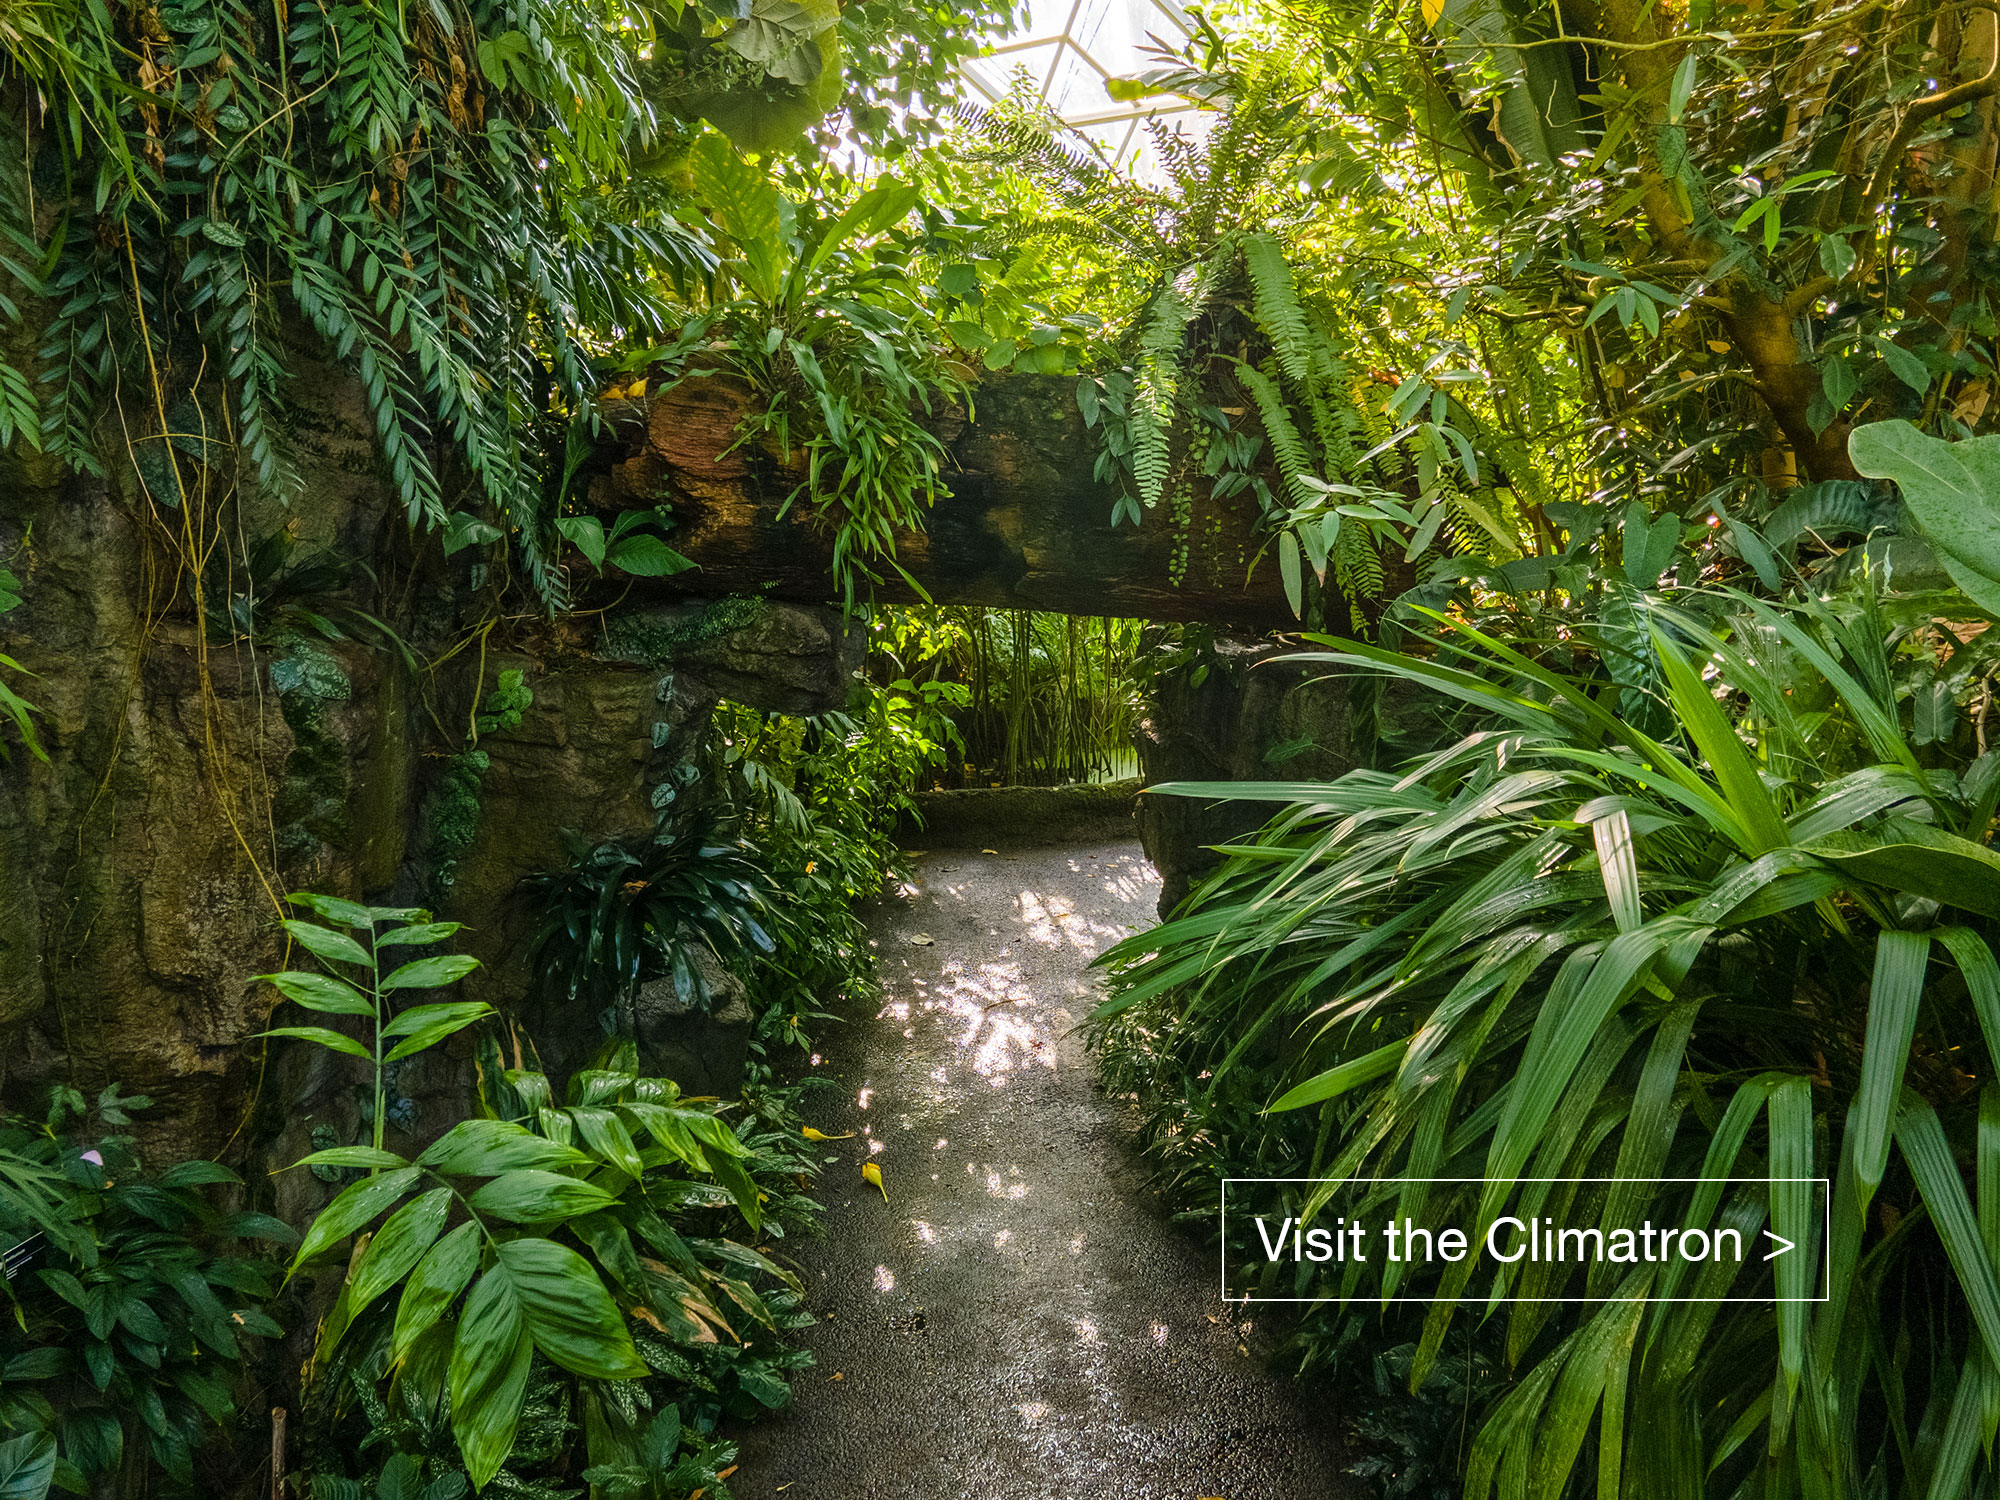 Lush foliage surrounds a pathway through the interior of the Climatron conservatory